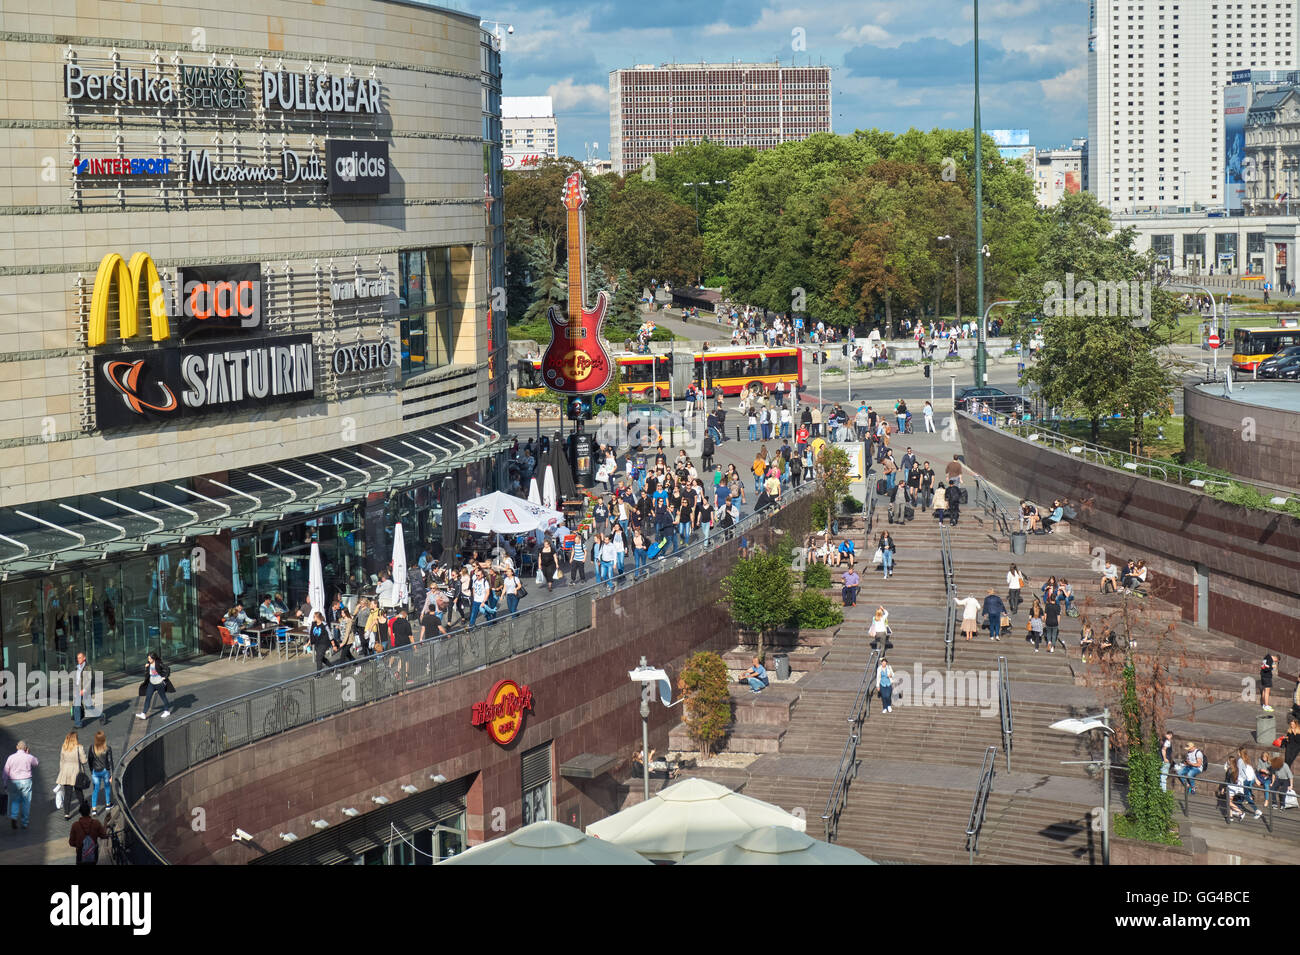 City Shopping Warsaw High Resolution Stock Photography and Images - Alamy